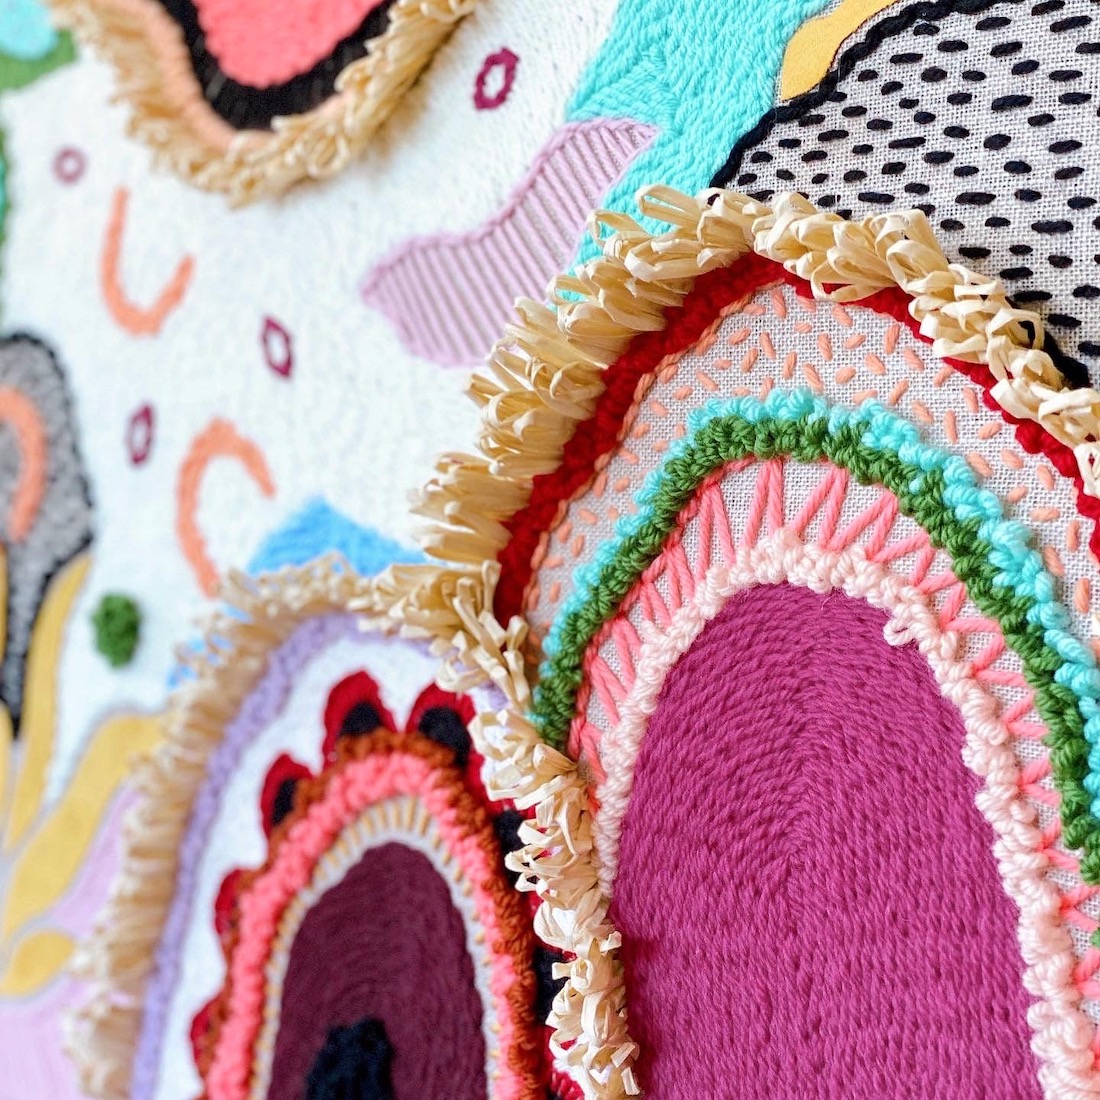 Raffia details in tapestry art by Pi Williams